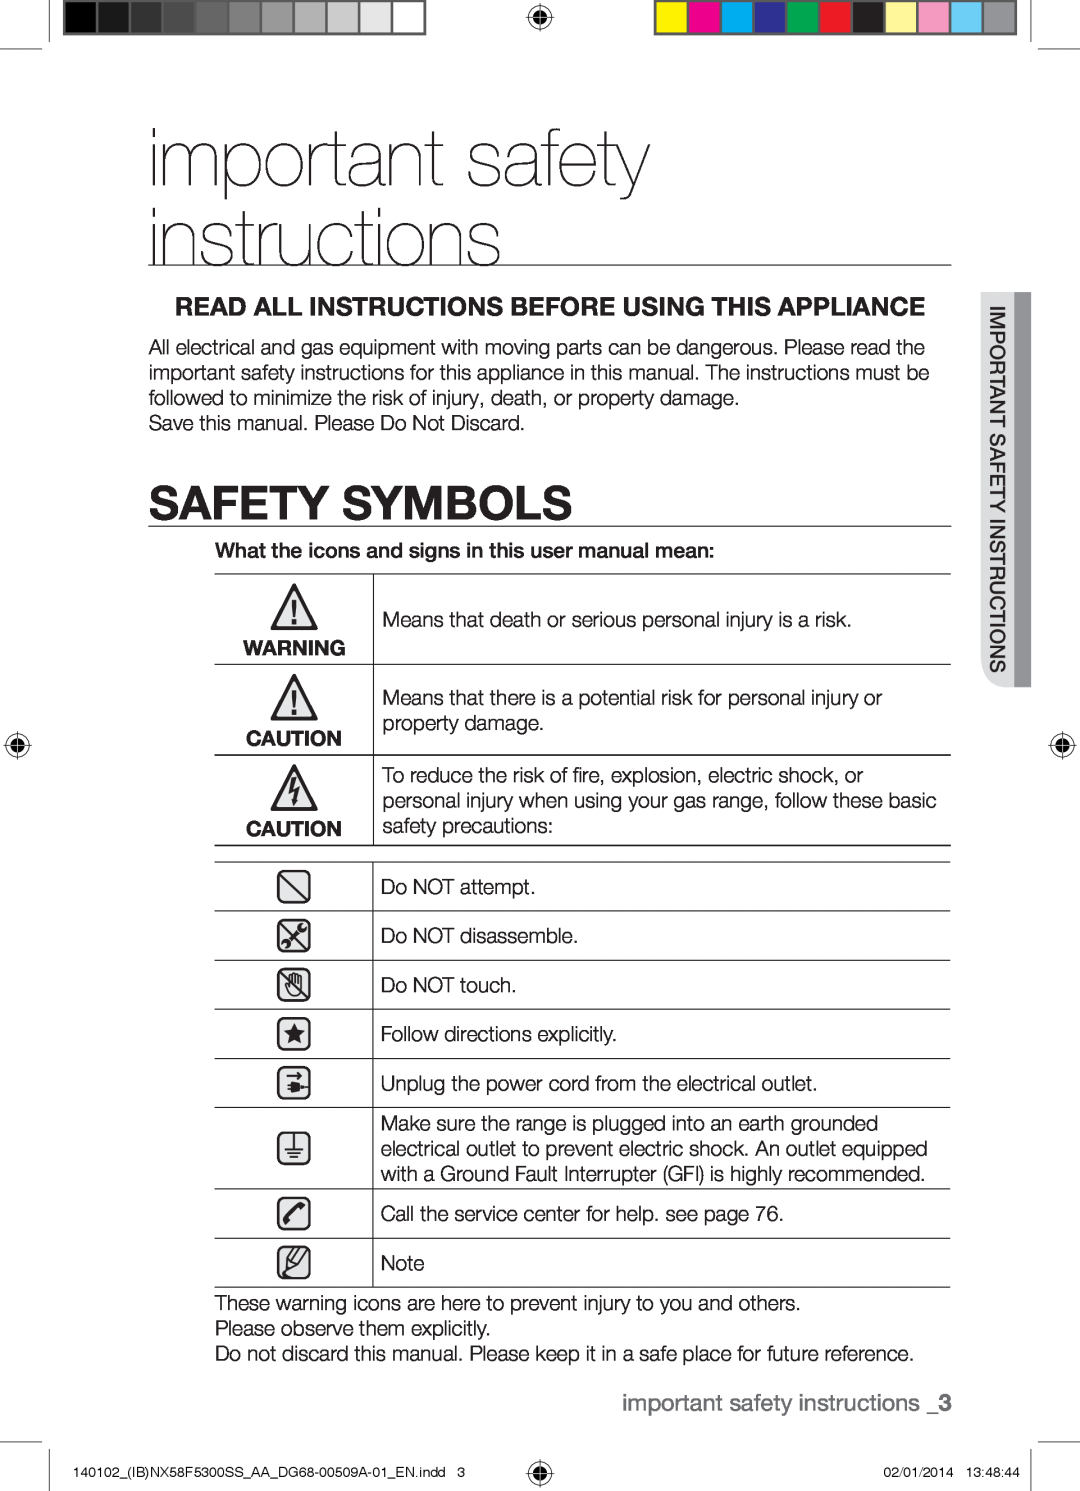 Samsung NX58F5500SW Safety Symbols, important safety instructions, Read All Instructions Before Using This Appliance 